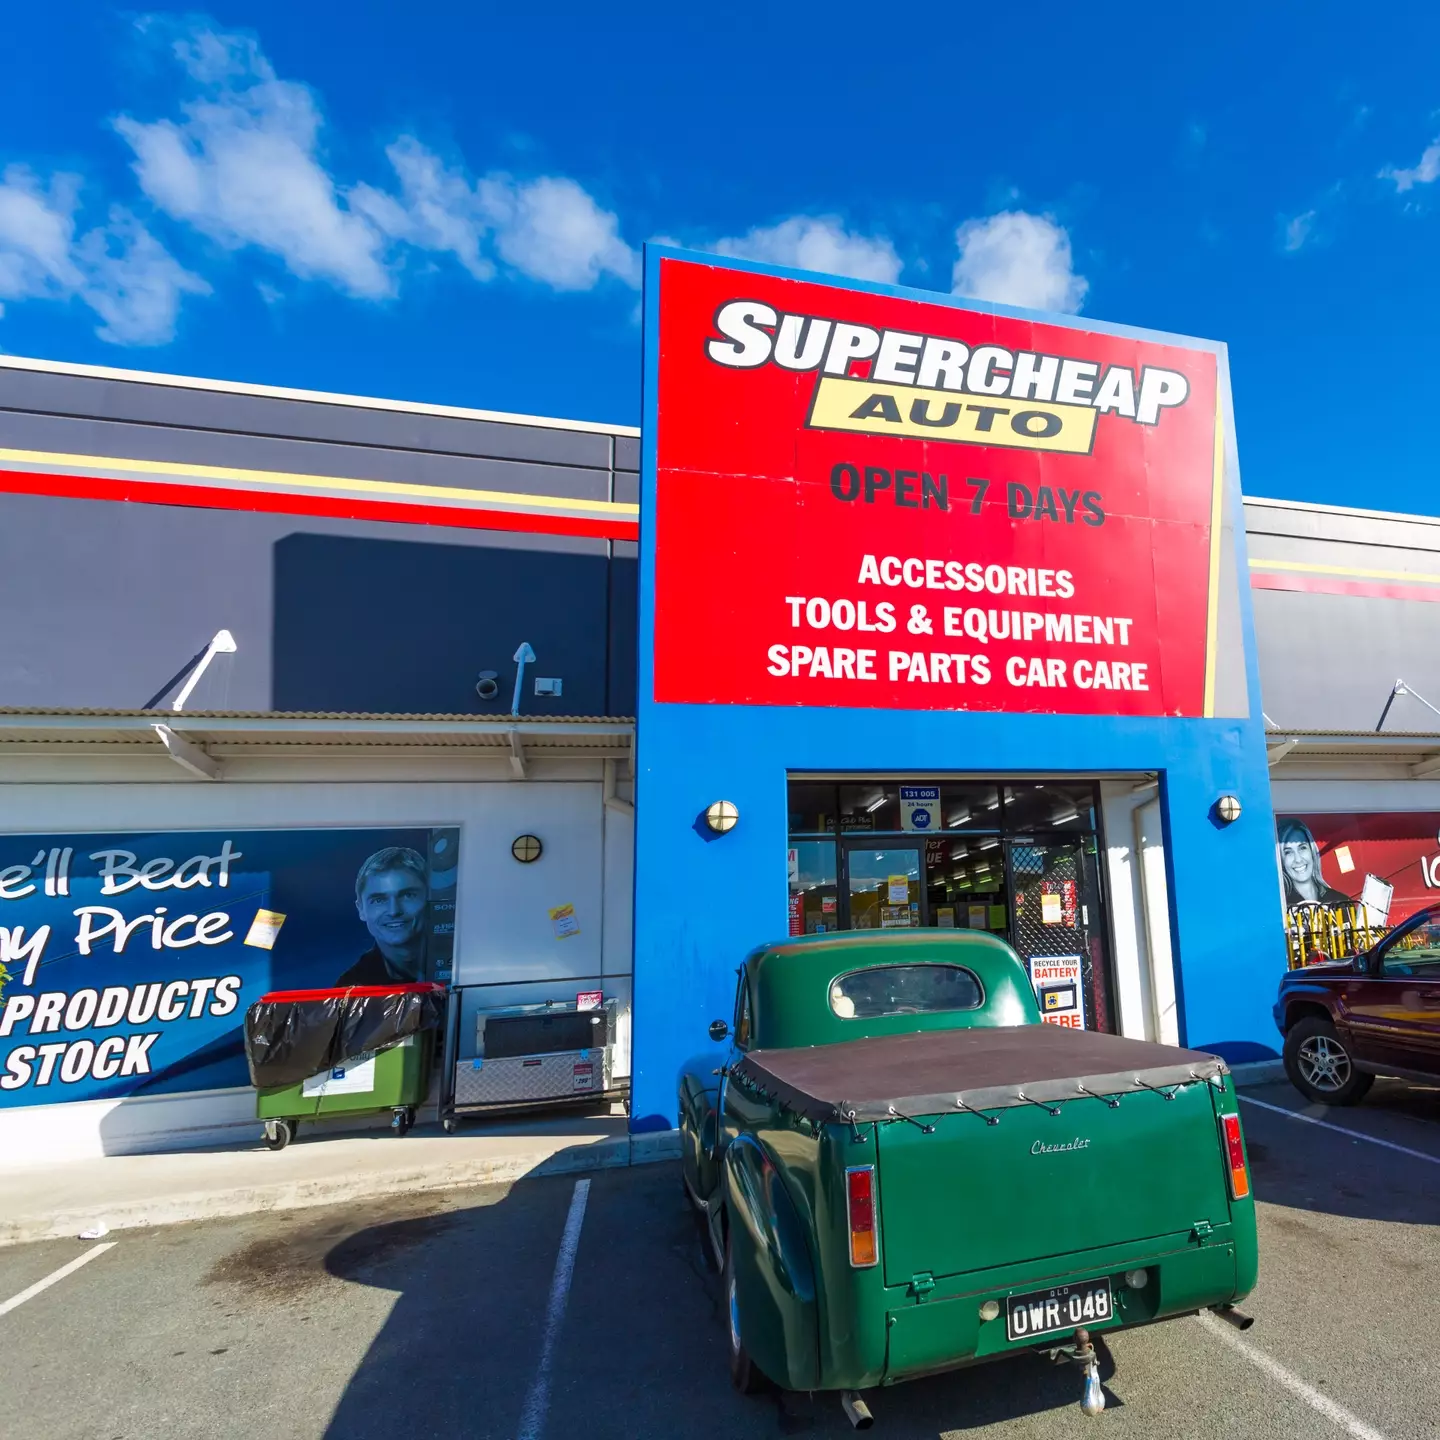 Supercheap Auto stated it's concern is always 'the health, safety and wellbeing of our team members and customers'.